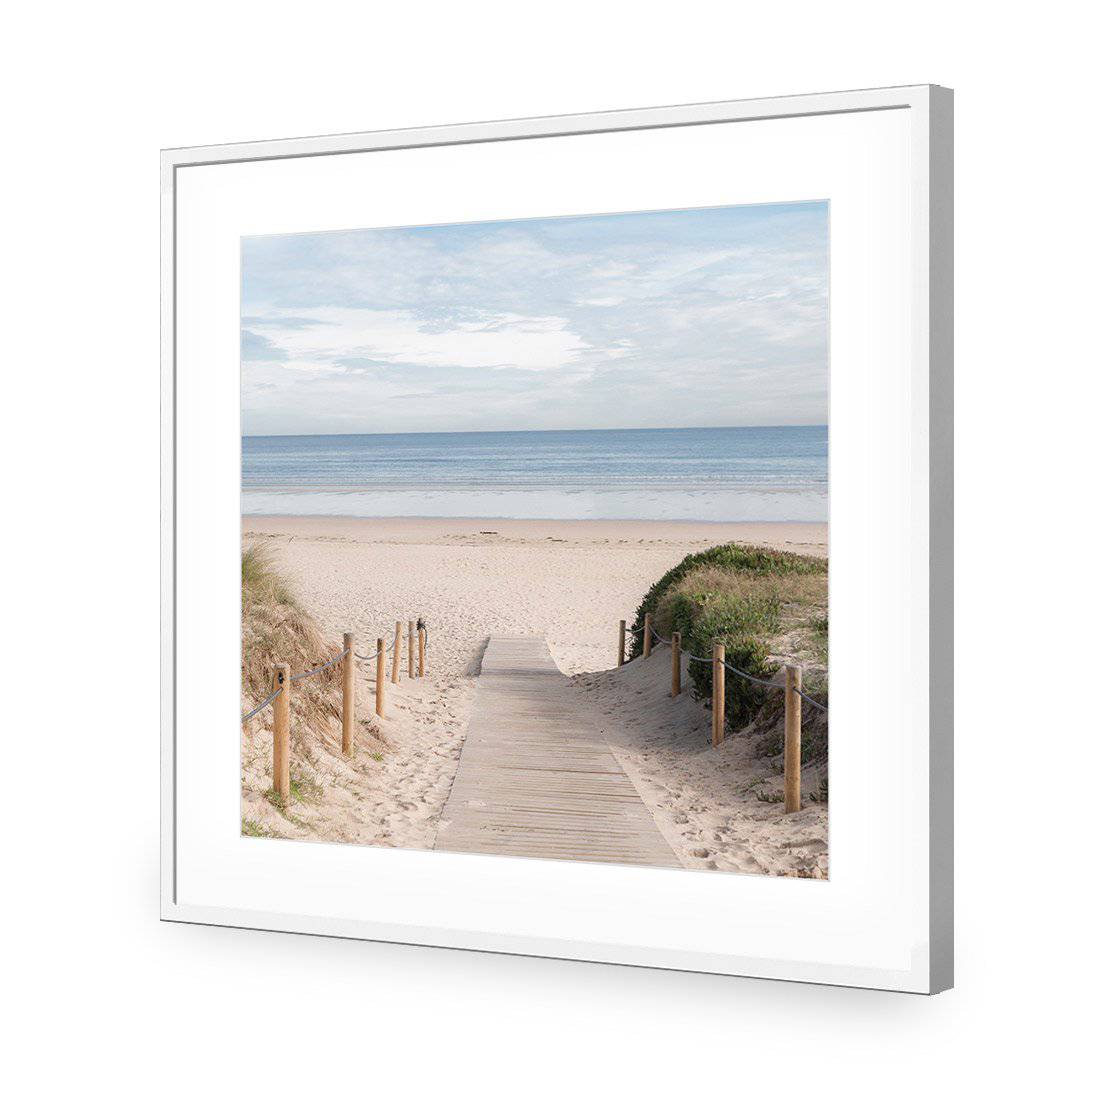 Pathway To The Sea, Square-Acrylic-Wall Art Design-With Border-Acrylic - White Frame-37x37cm-Wall Art Designs